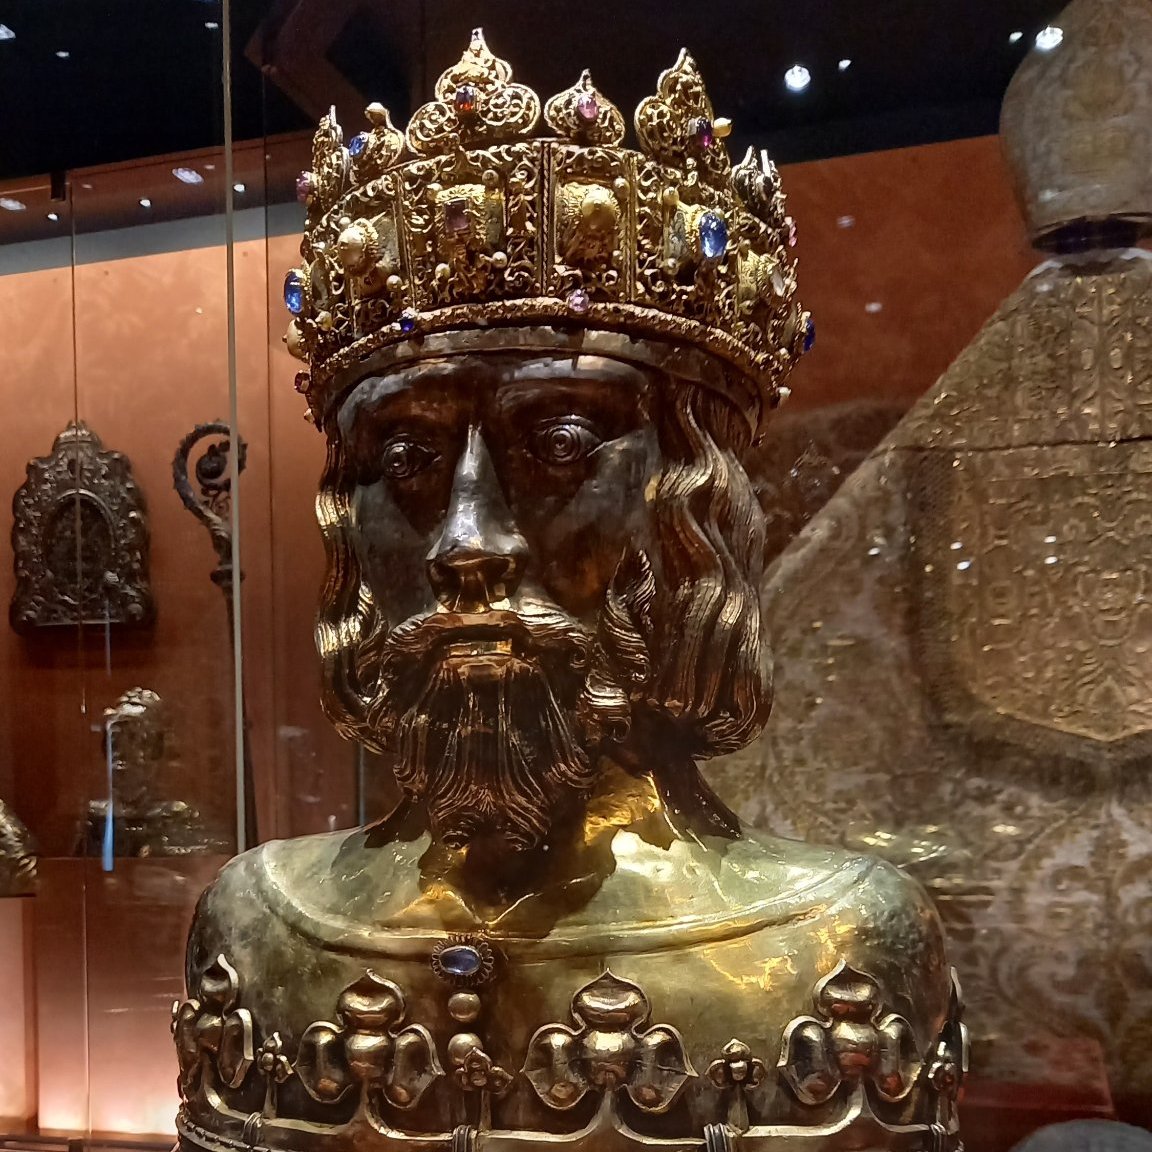 In the event of the restoration of the monarchy in Poland, the King's Crown may become the 'Crown-Diadem of Płock'. An original artifact of Prince Konrad of Mazovia from the 13th century. Unique in Europe. ⚔️🇵🇱👑🛡️